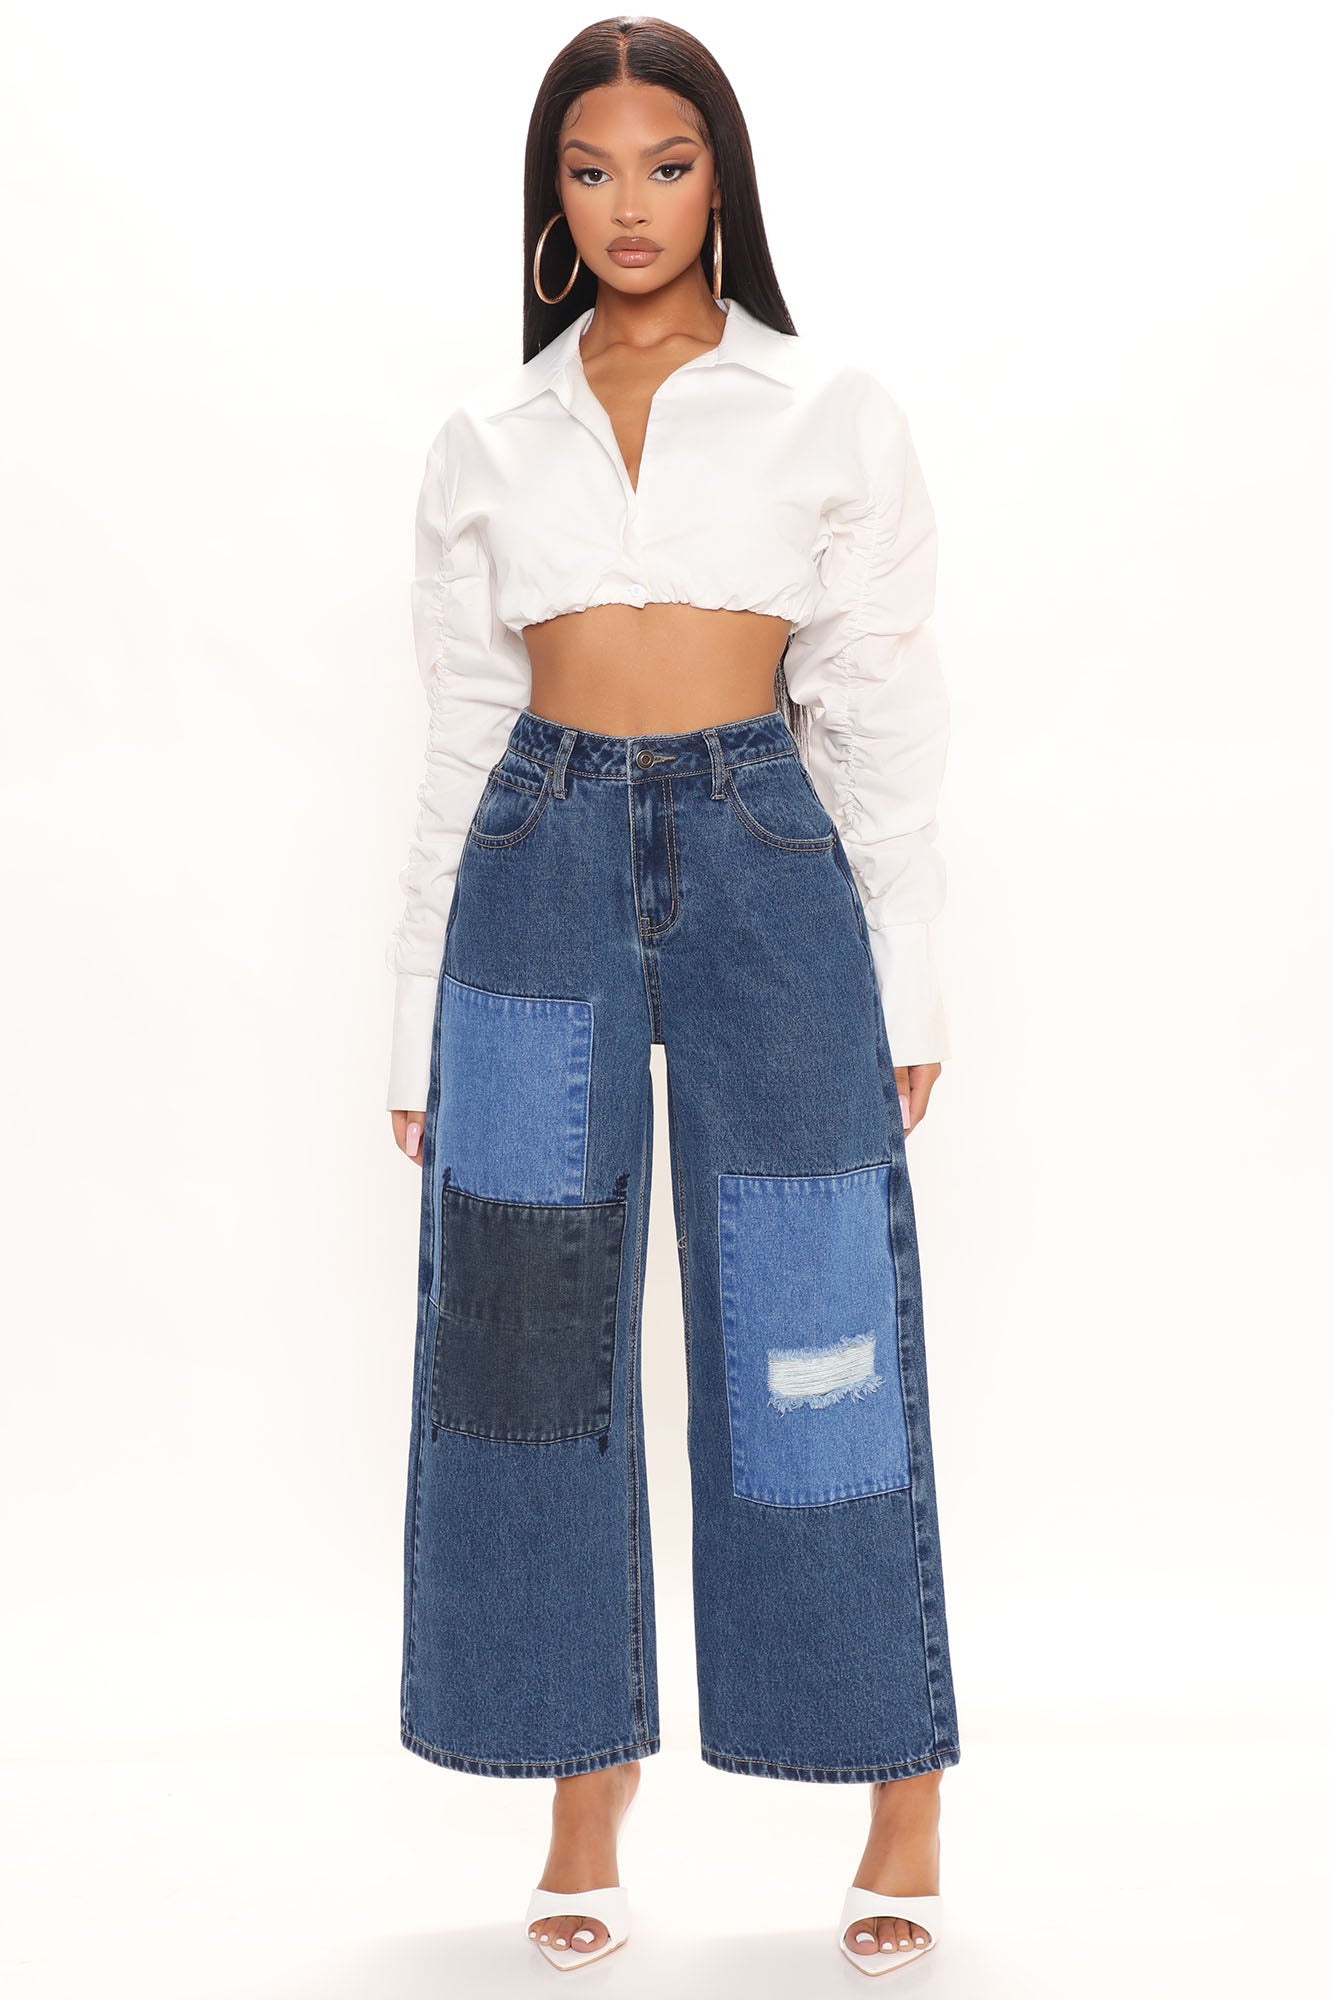 Caught In A Daydream Patchwork Ankle Jeans - Dark Wash